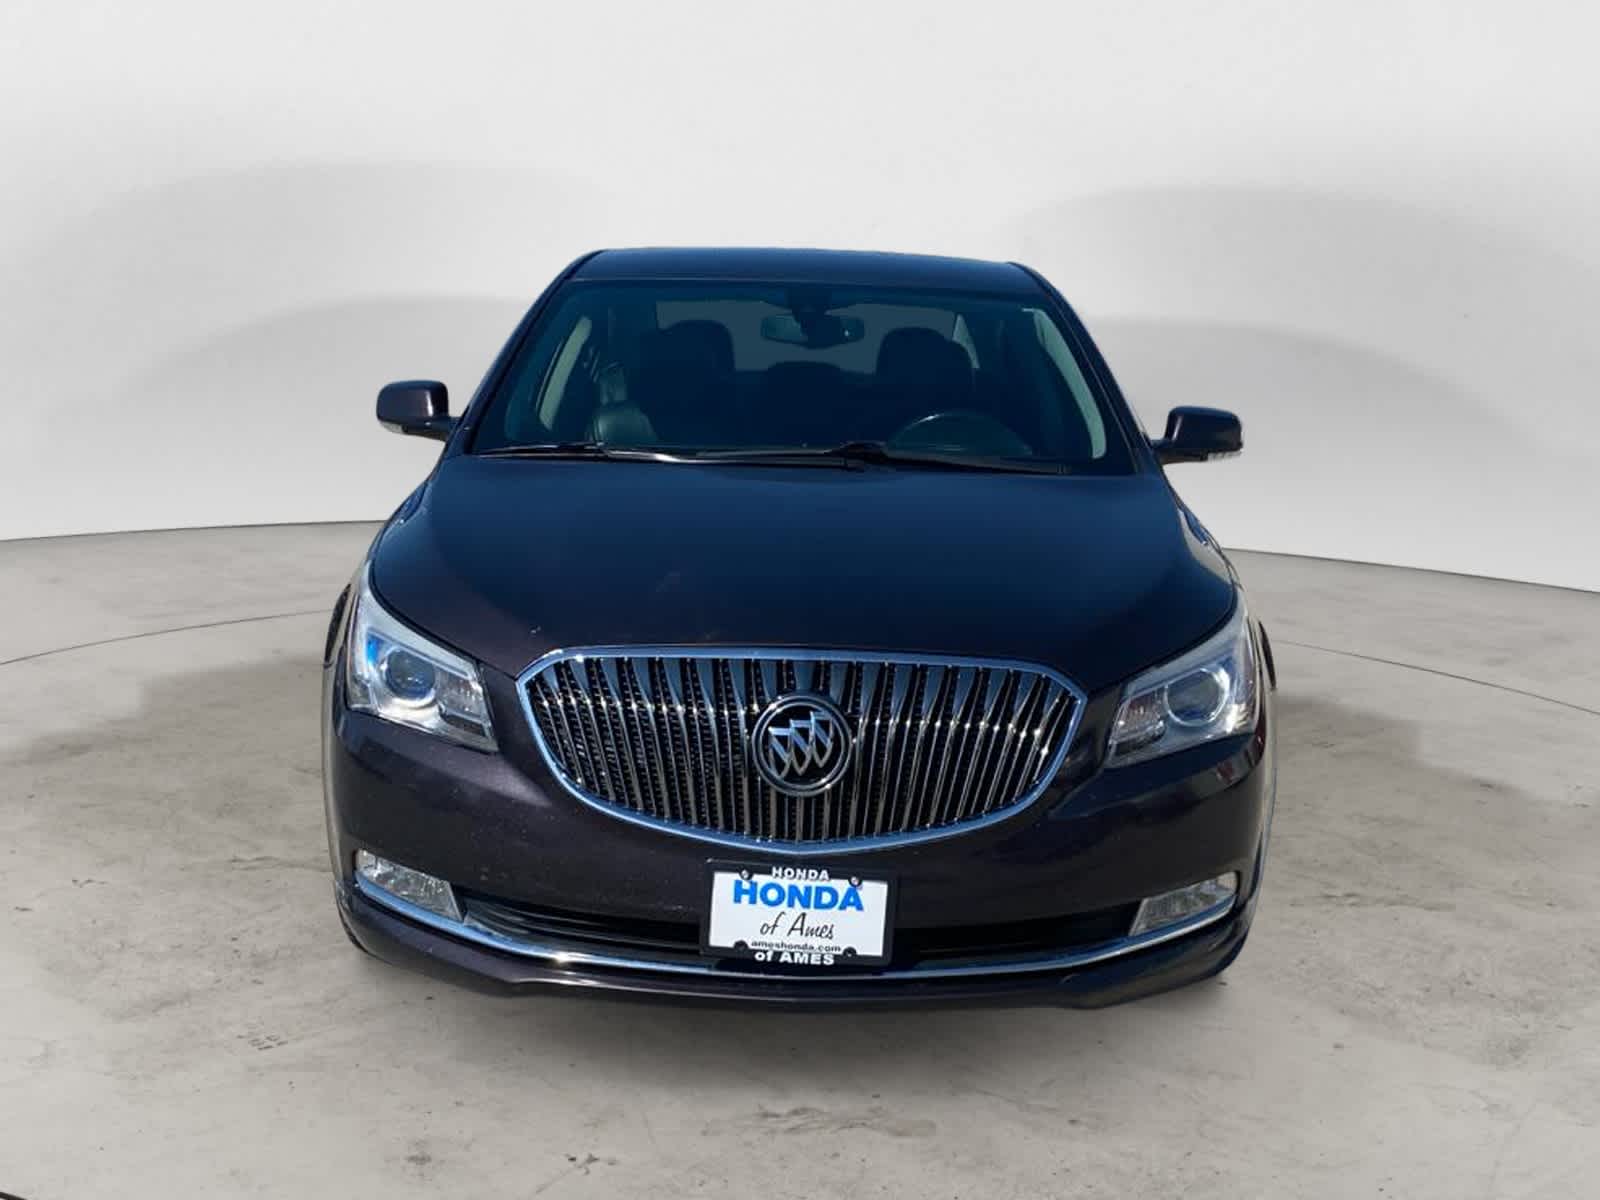 2014 Buick LaCrosse Leather 2